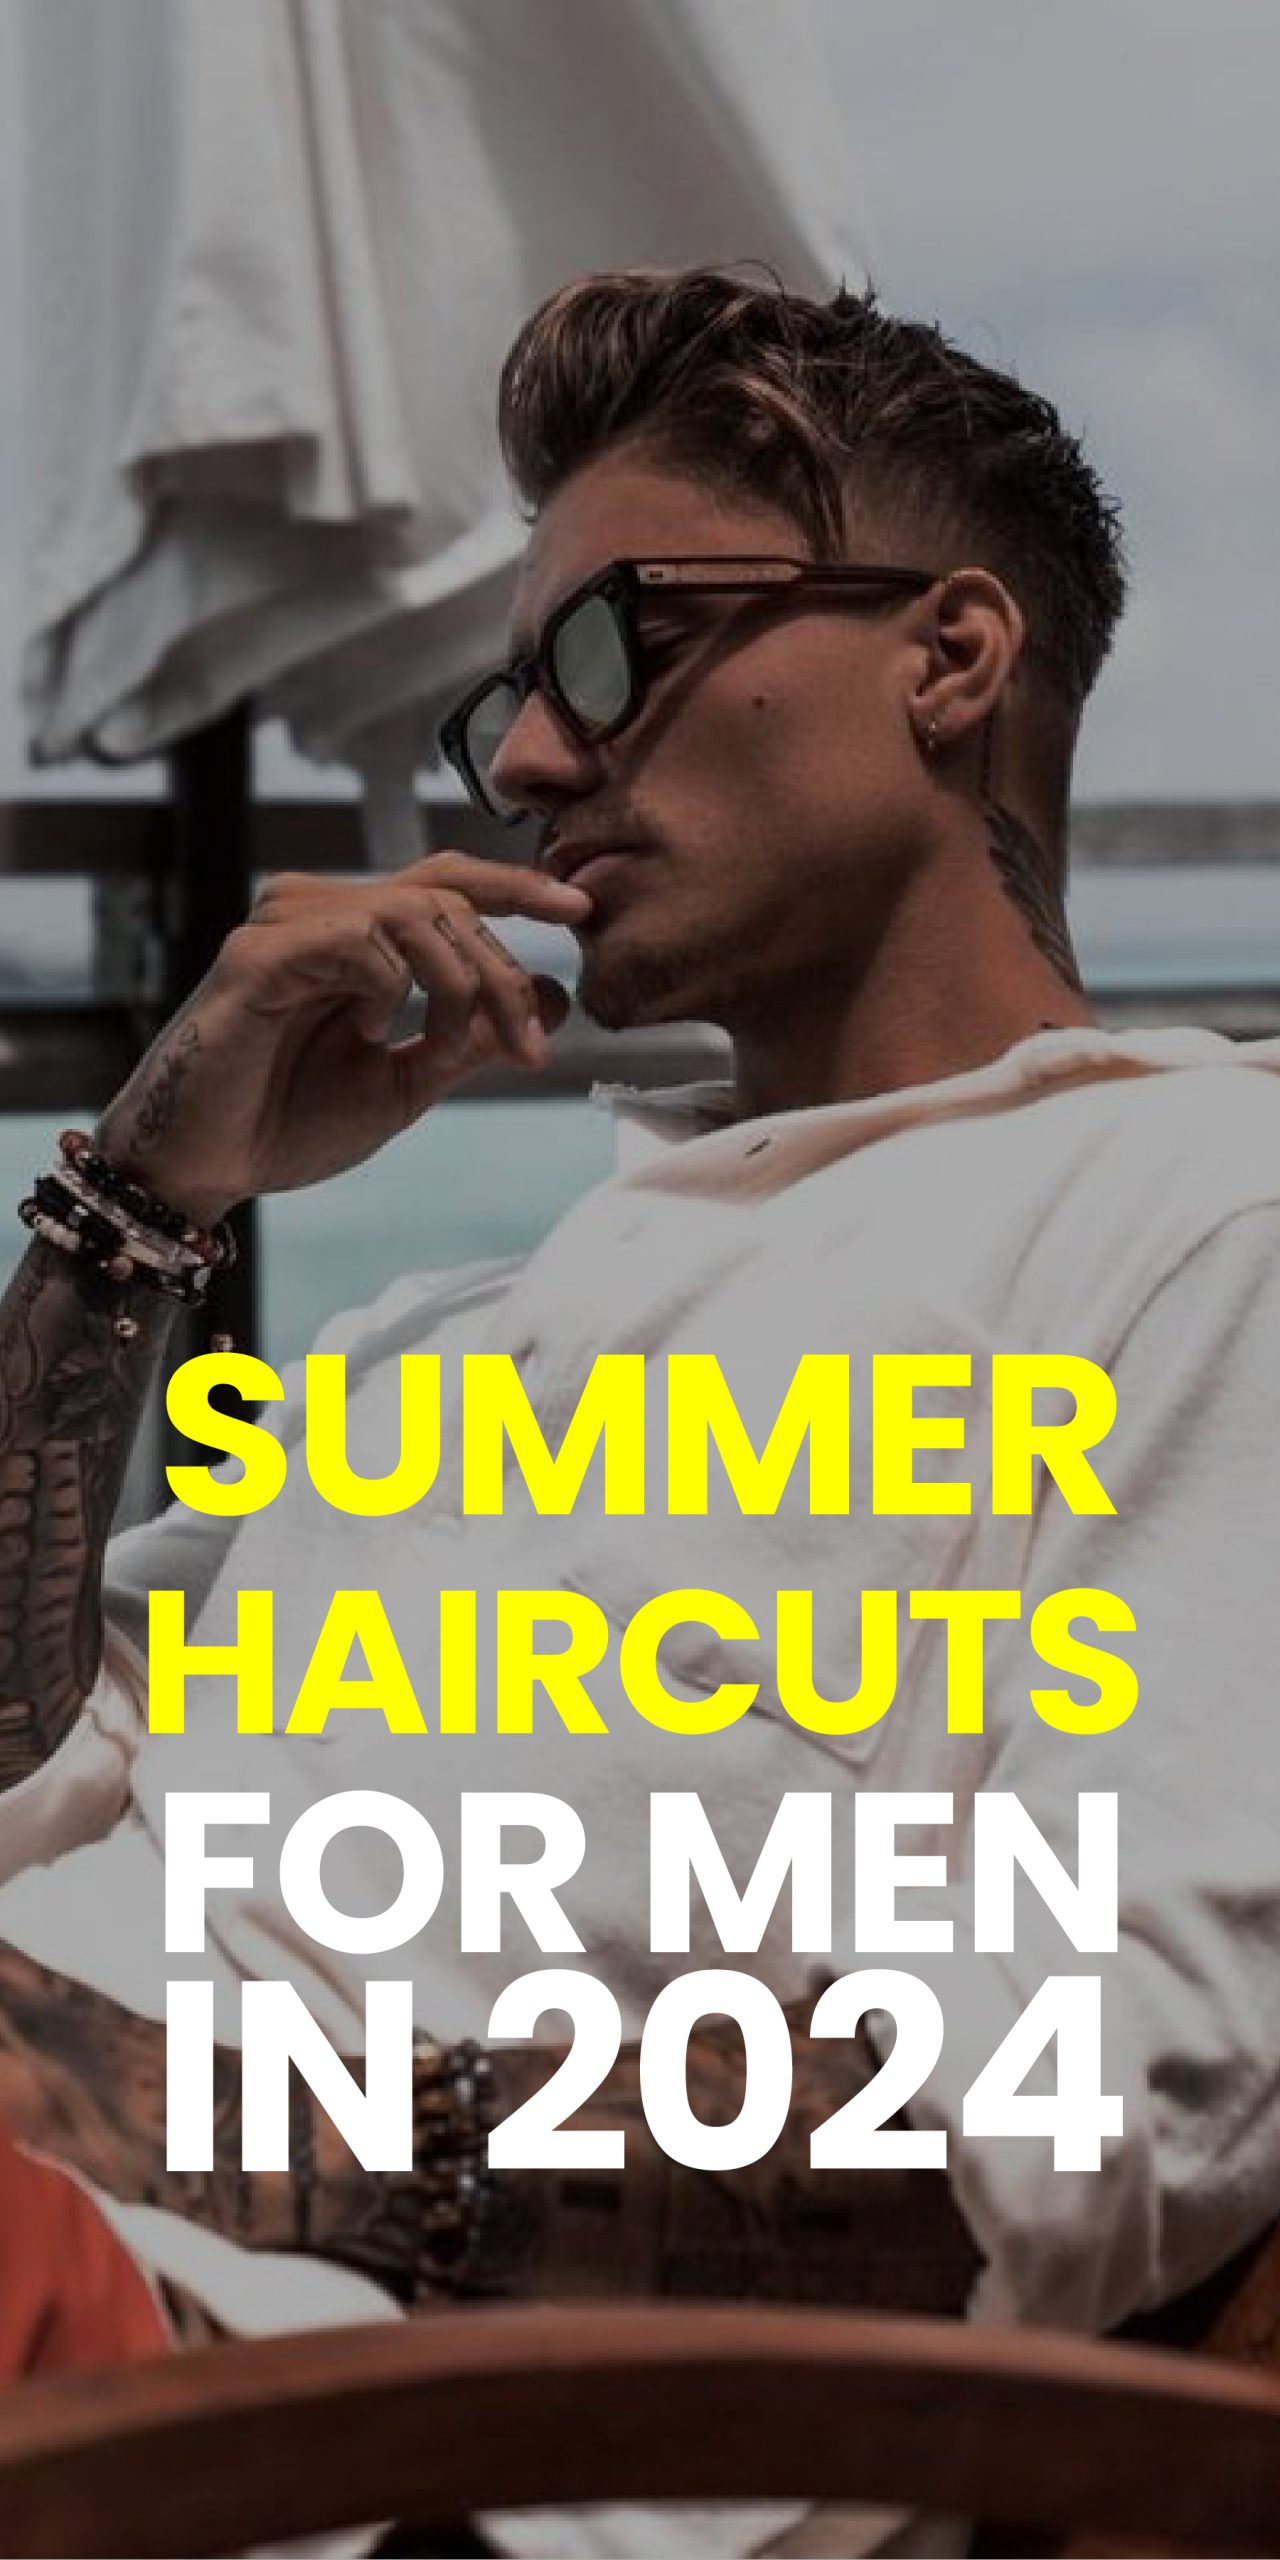 SUMMER HAIRCUTS FOR MEN IN 2024